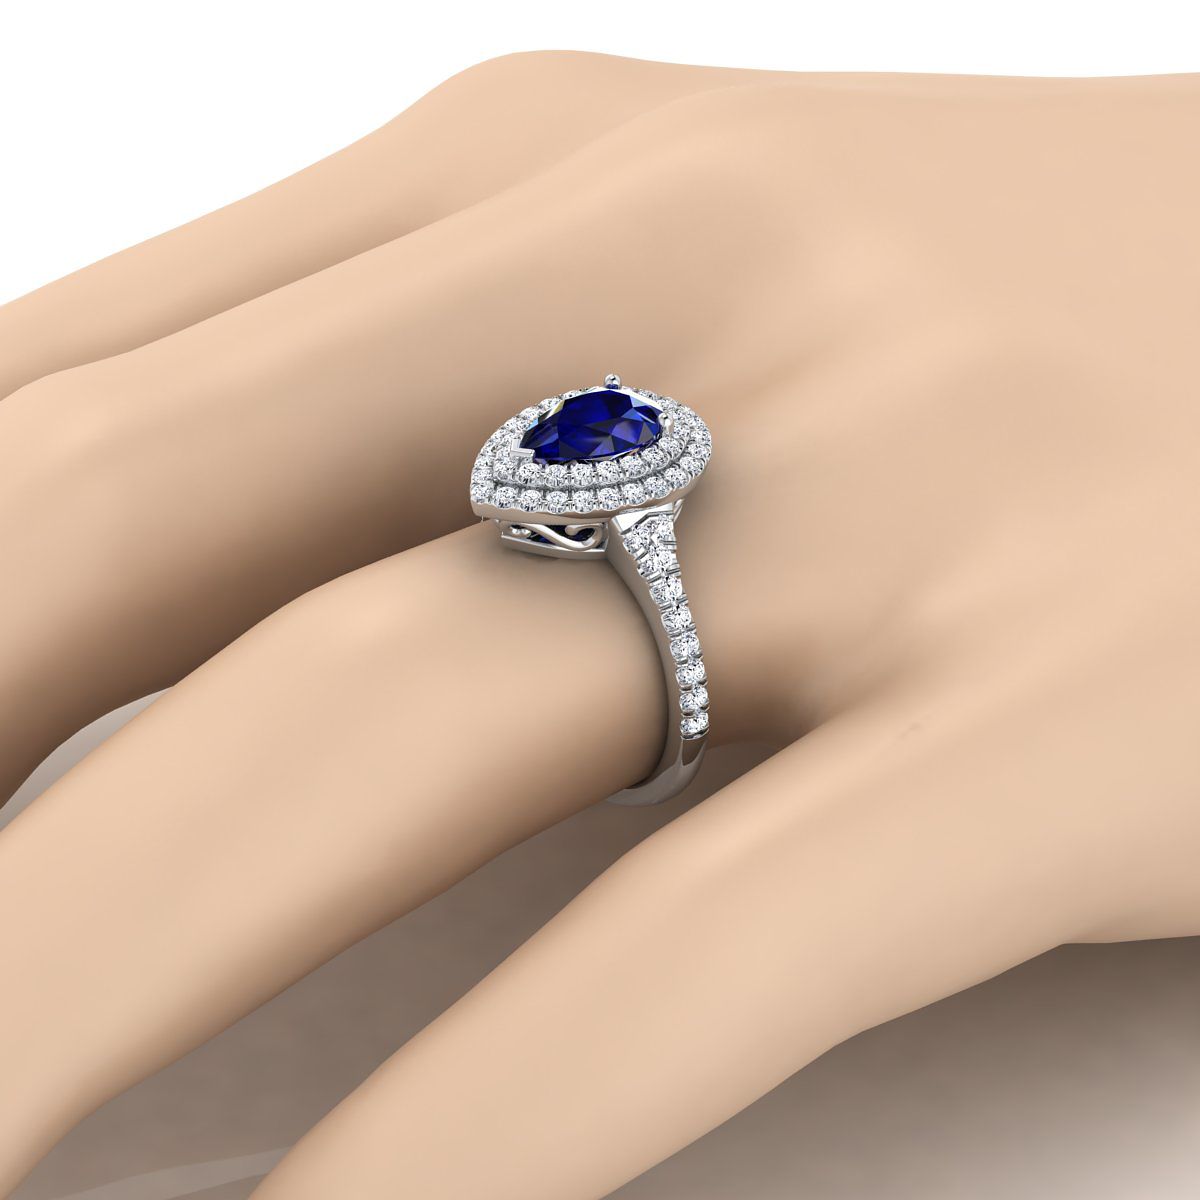 14K White Gold Pear Shape Center Sapphire Double Halo with Scalloped Pavé Diamond Engagement Ring -1/2ctw